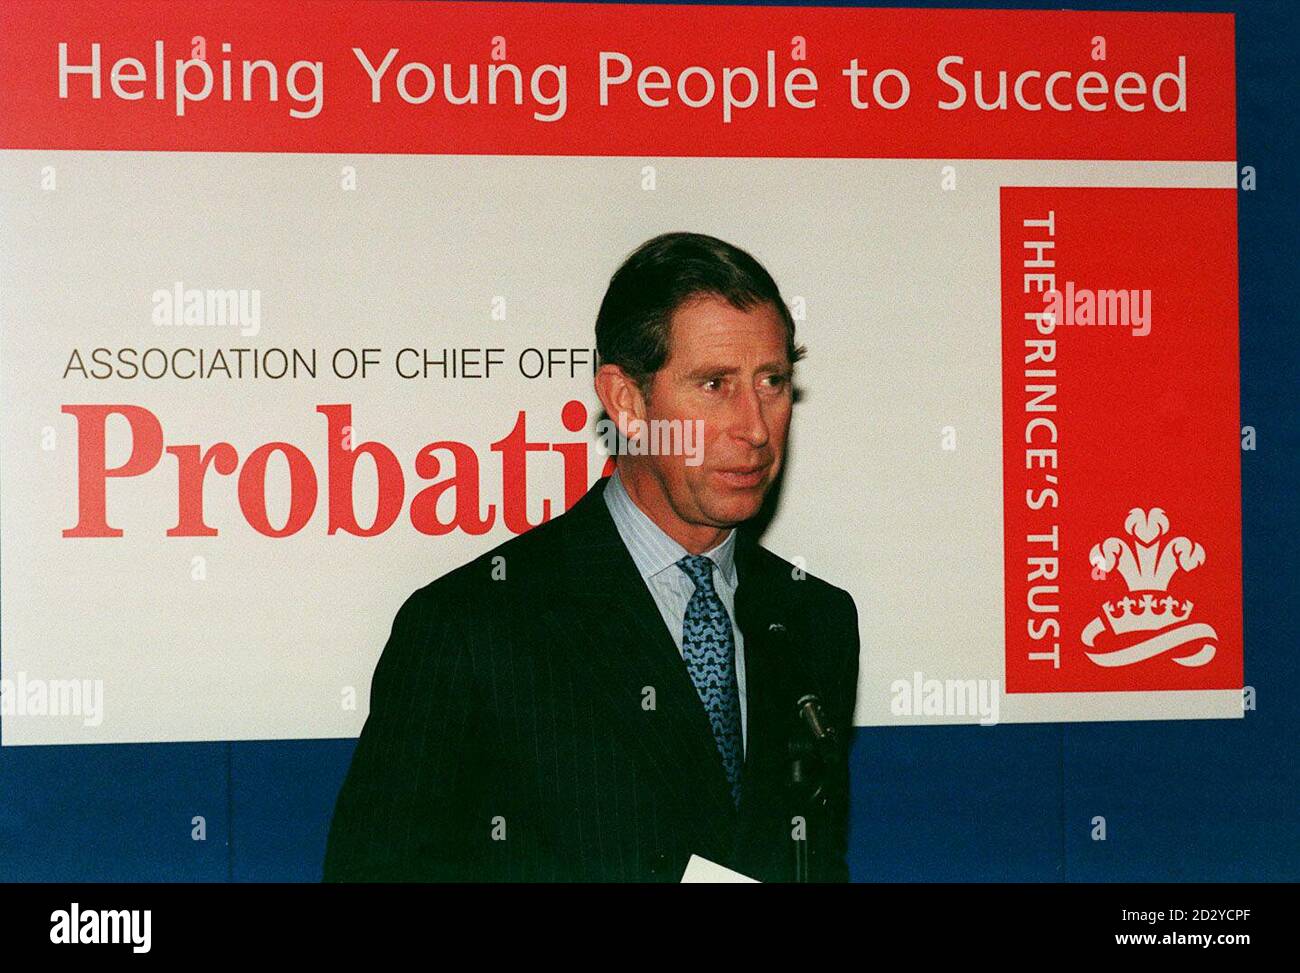 PA NEWS PHOTO 29/01/98: PRINCE CHARLES, PRINCE OF WALES AT THE CLOSING SESSION OF THE SEMINAR AT THE PRINCE'S TRUST NATIONAL CONFERENCE FOR THE PROBATION SERVICE AT THE CORPORATION OF LONDON, GUILDHALL Stock Photo